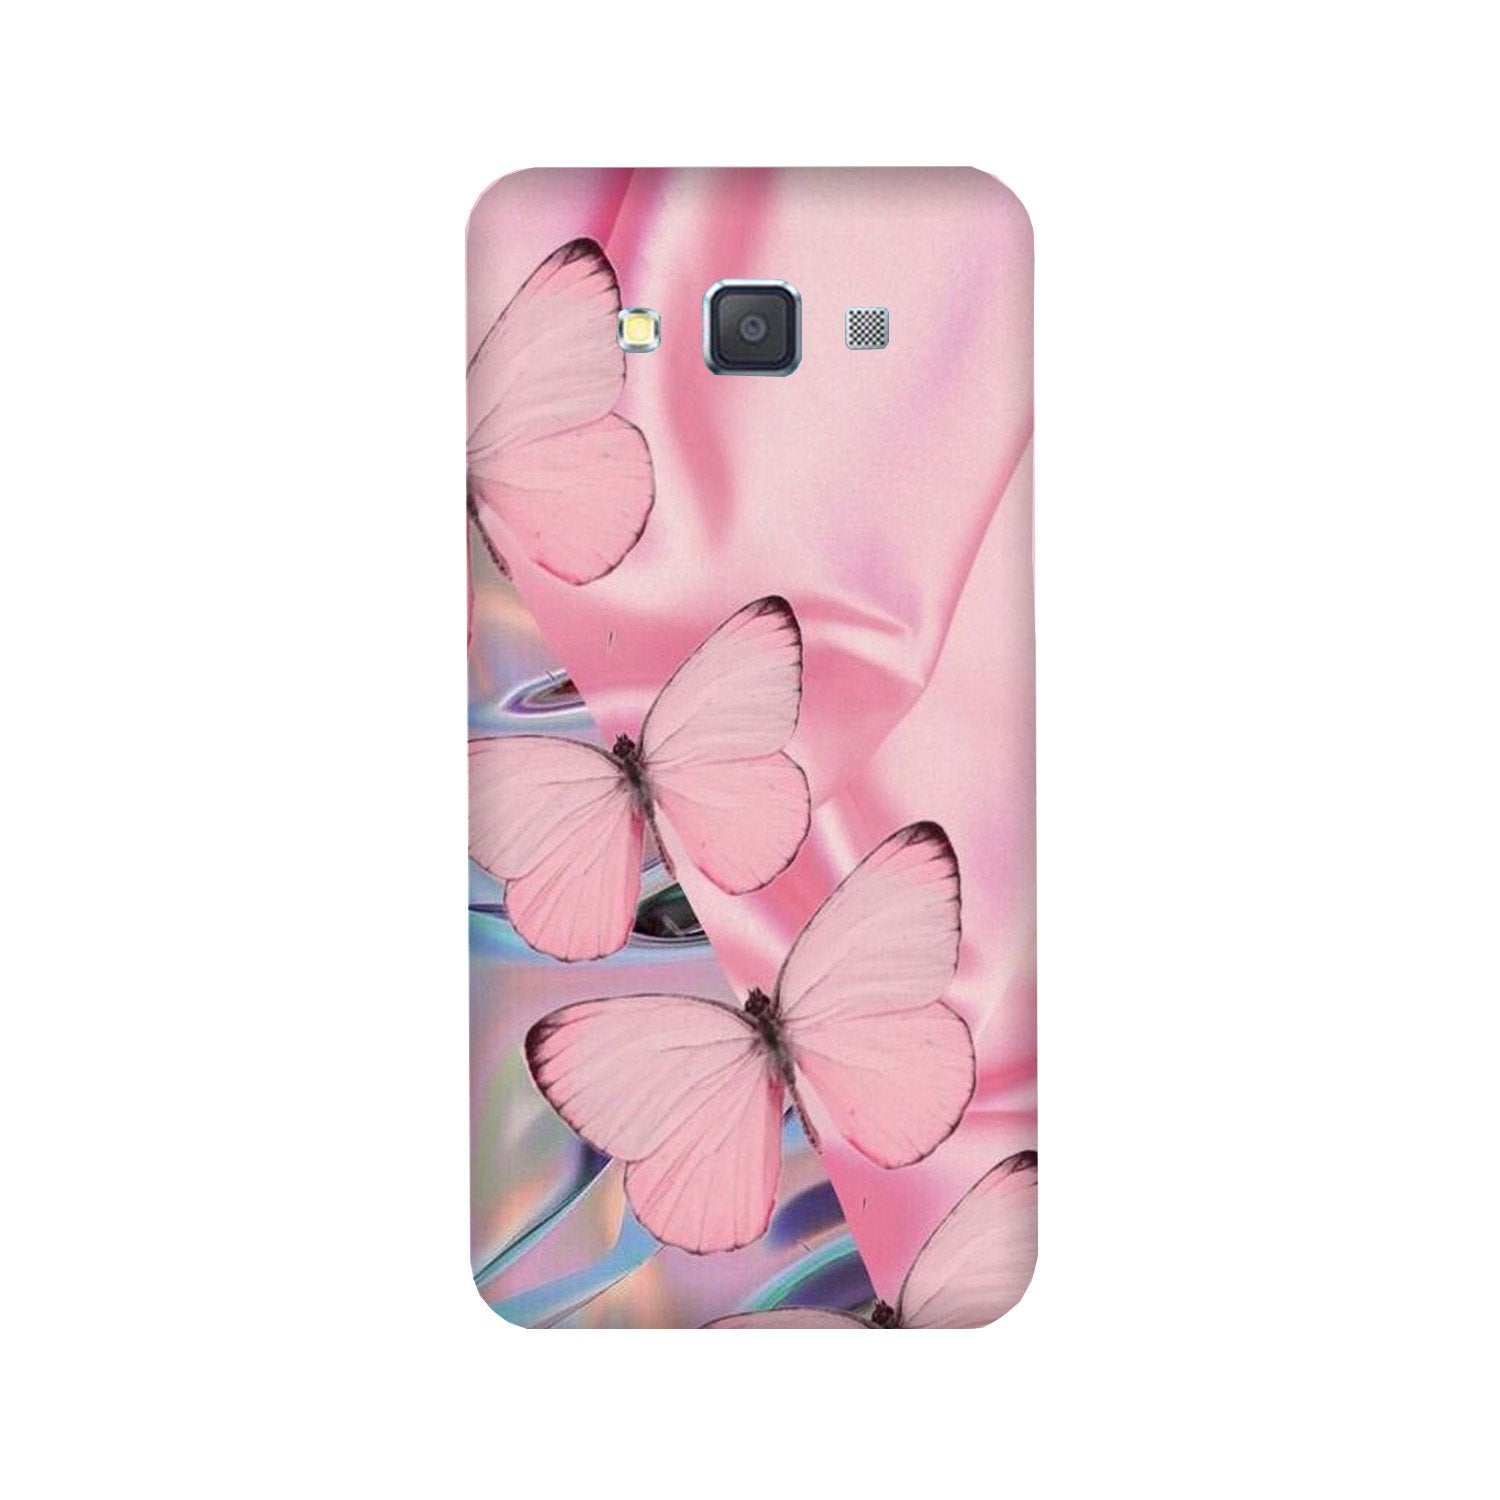 Butterflies Case for Galaxy ON7/ON7 Pro